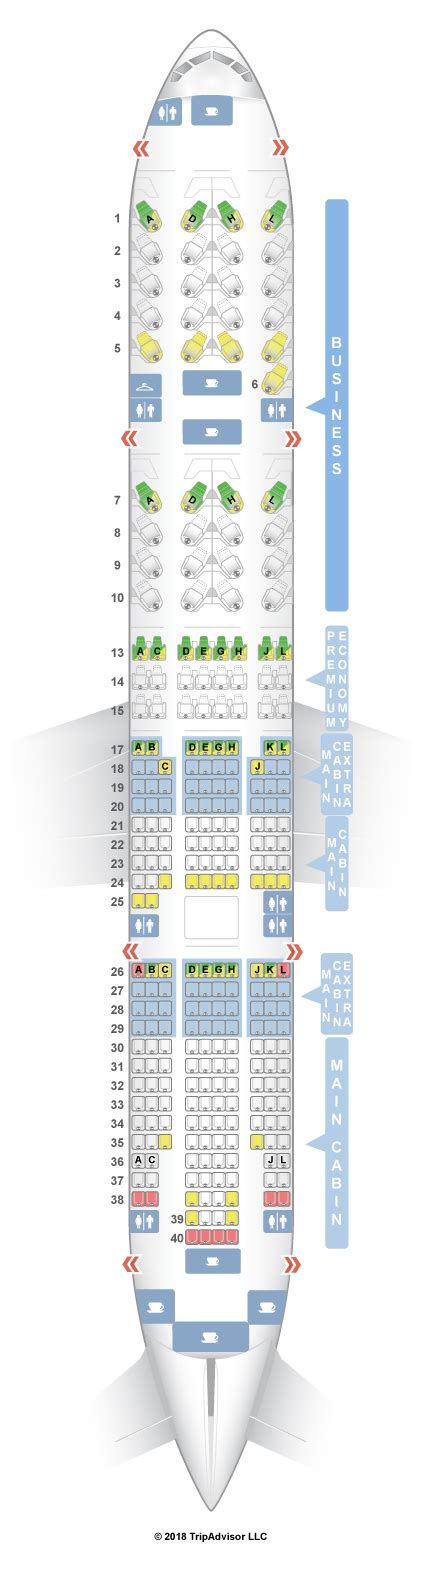 American airlines boeing 777 200er seat map - local_pizza. Seat 36J is a standard economy aisle seat with 31-33" of seat pitch, which is average across Boeing 777-200's worldwide. 36J is has a bulkhead behind it, which means there's nobody behind you to bump or kick your seat, but your seat recline may be slightly limited. 